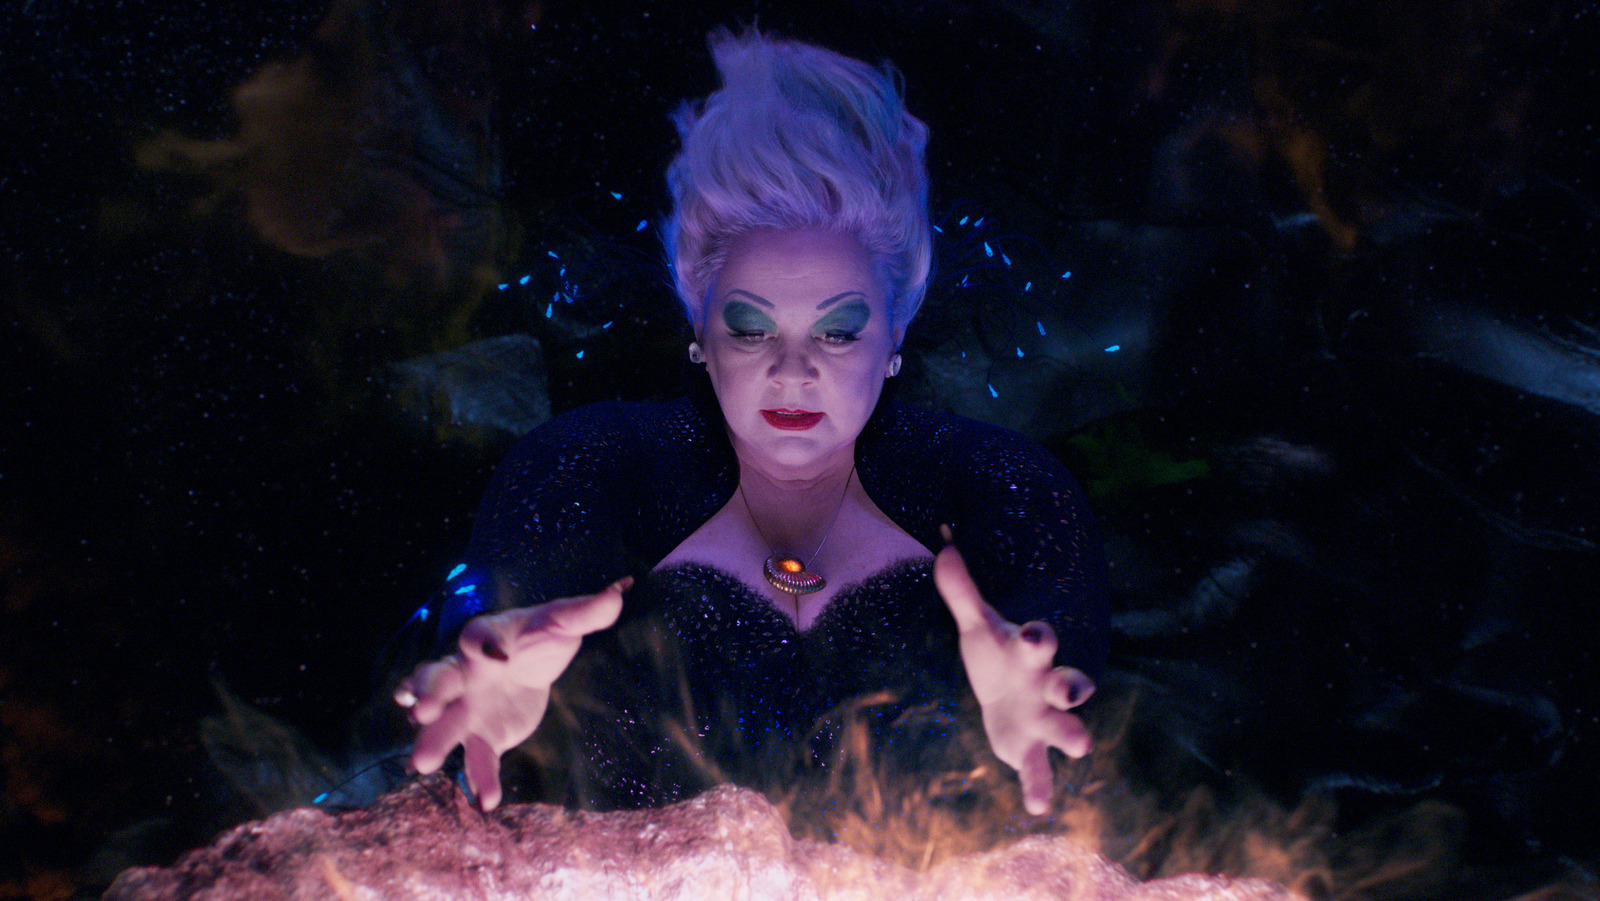 The Little Mermaid Gives Ursula a Real Story, for Better or Worse